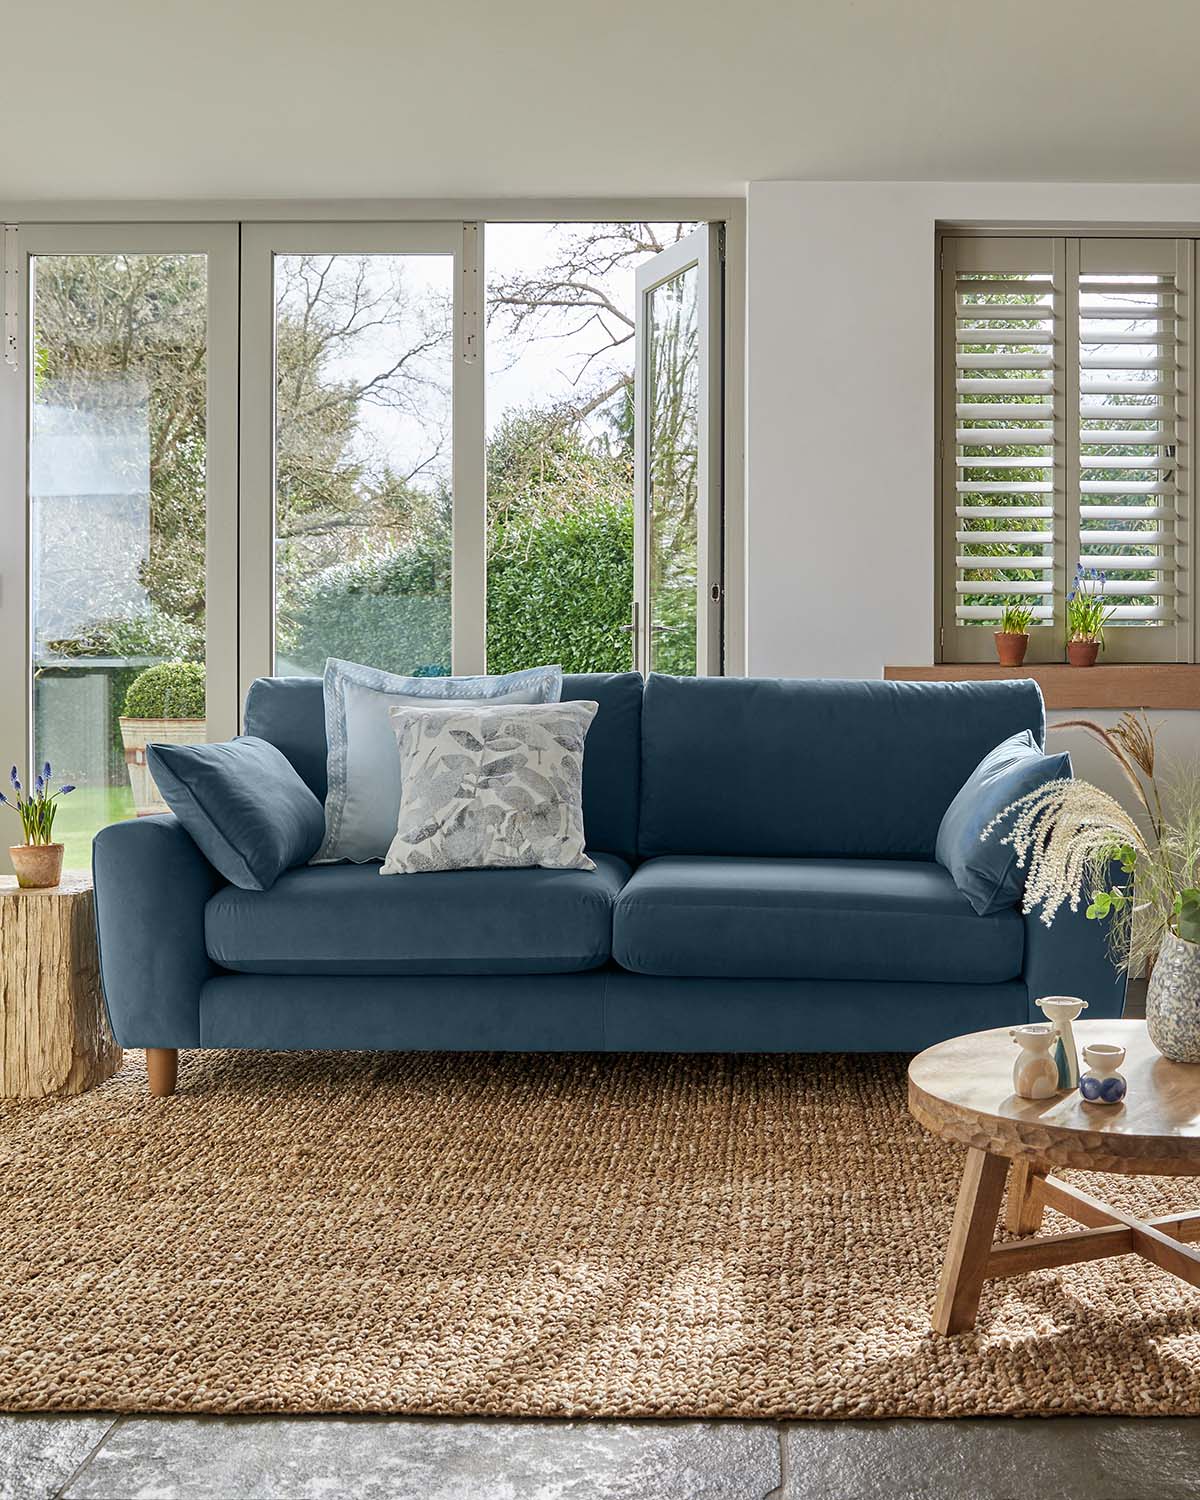 Blue sofa sitting on natural jute rug with windows behind it